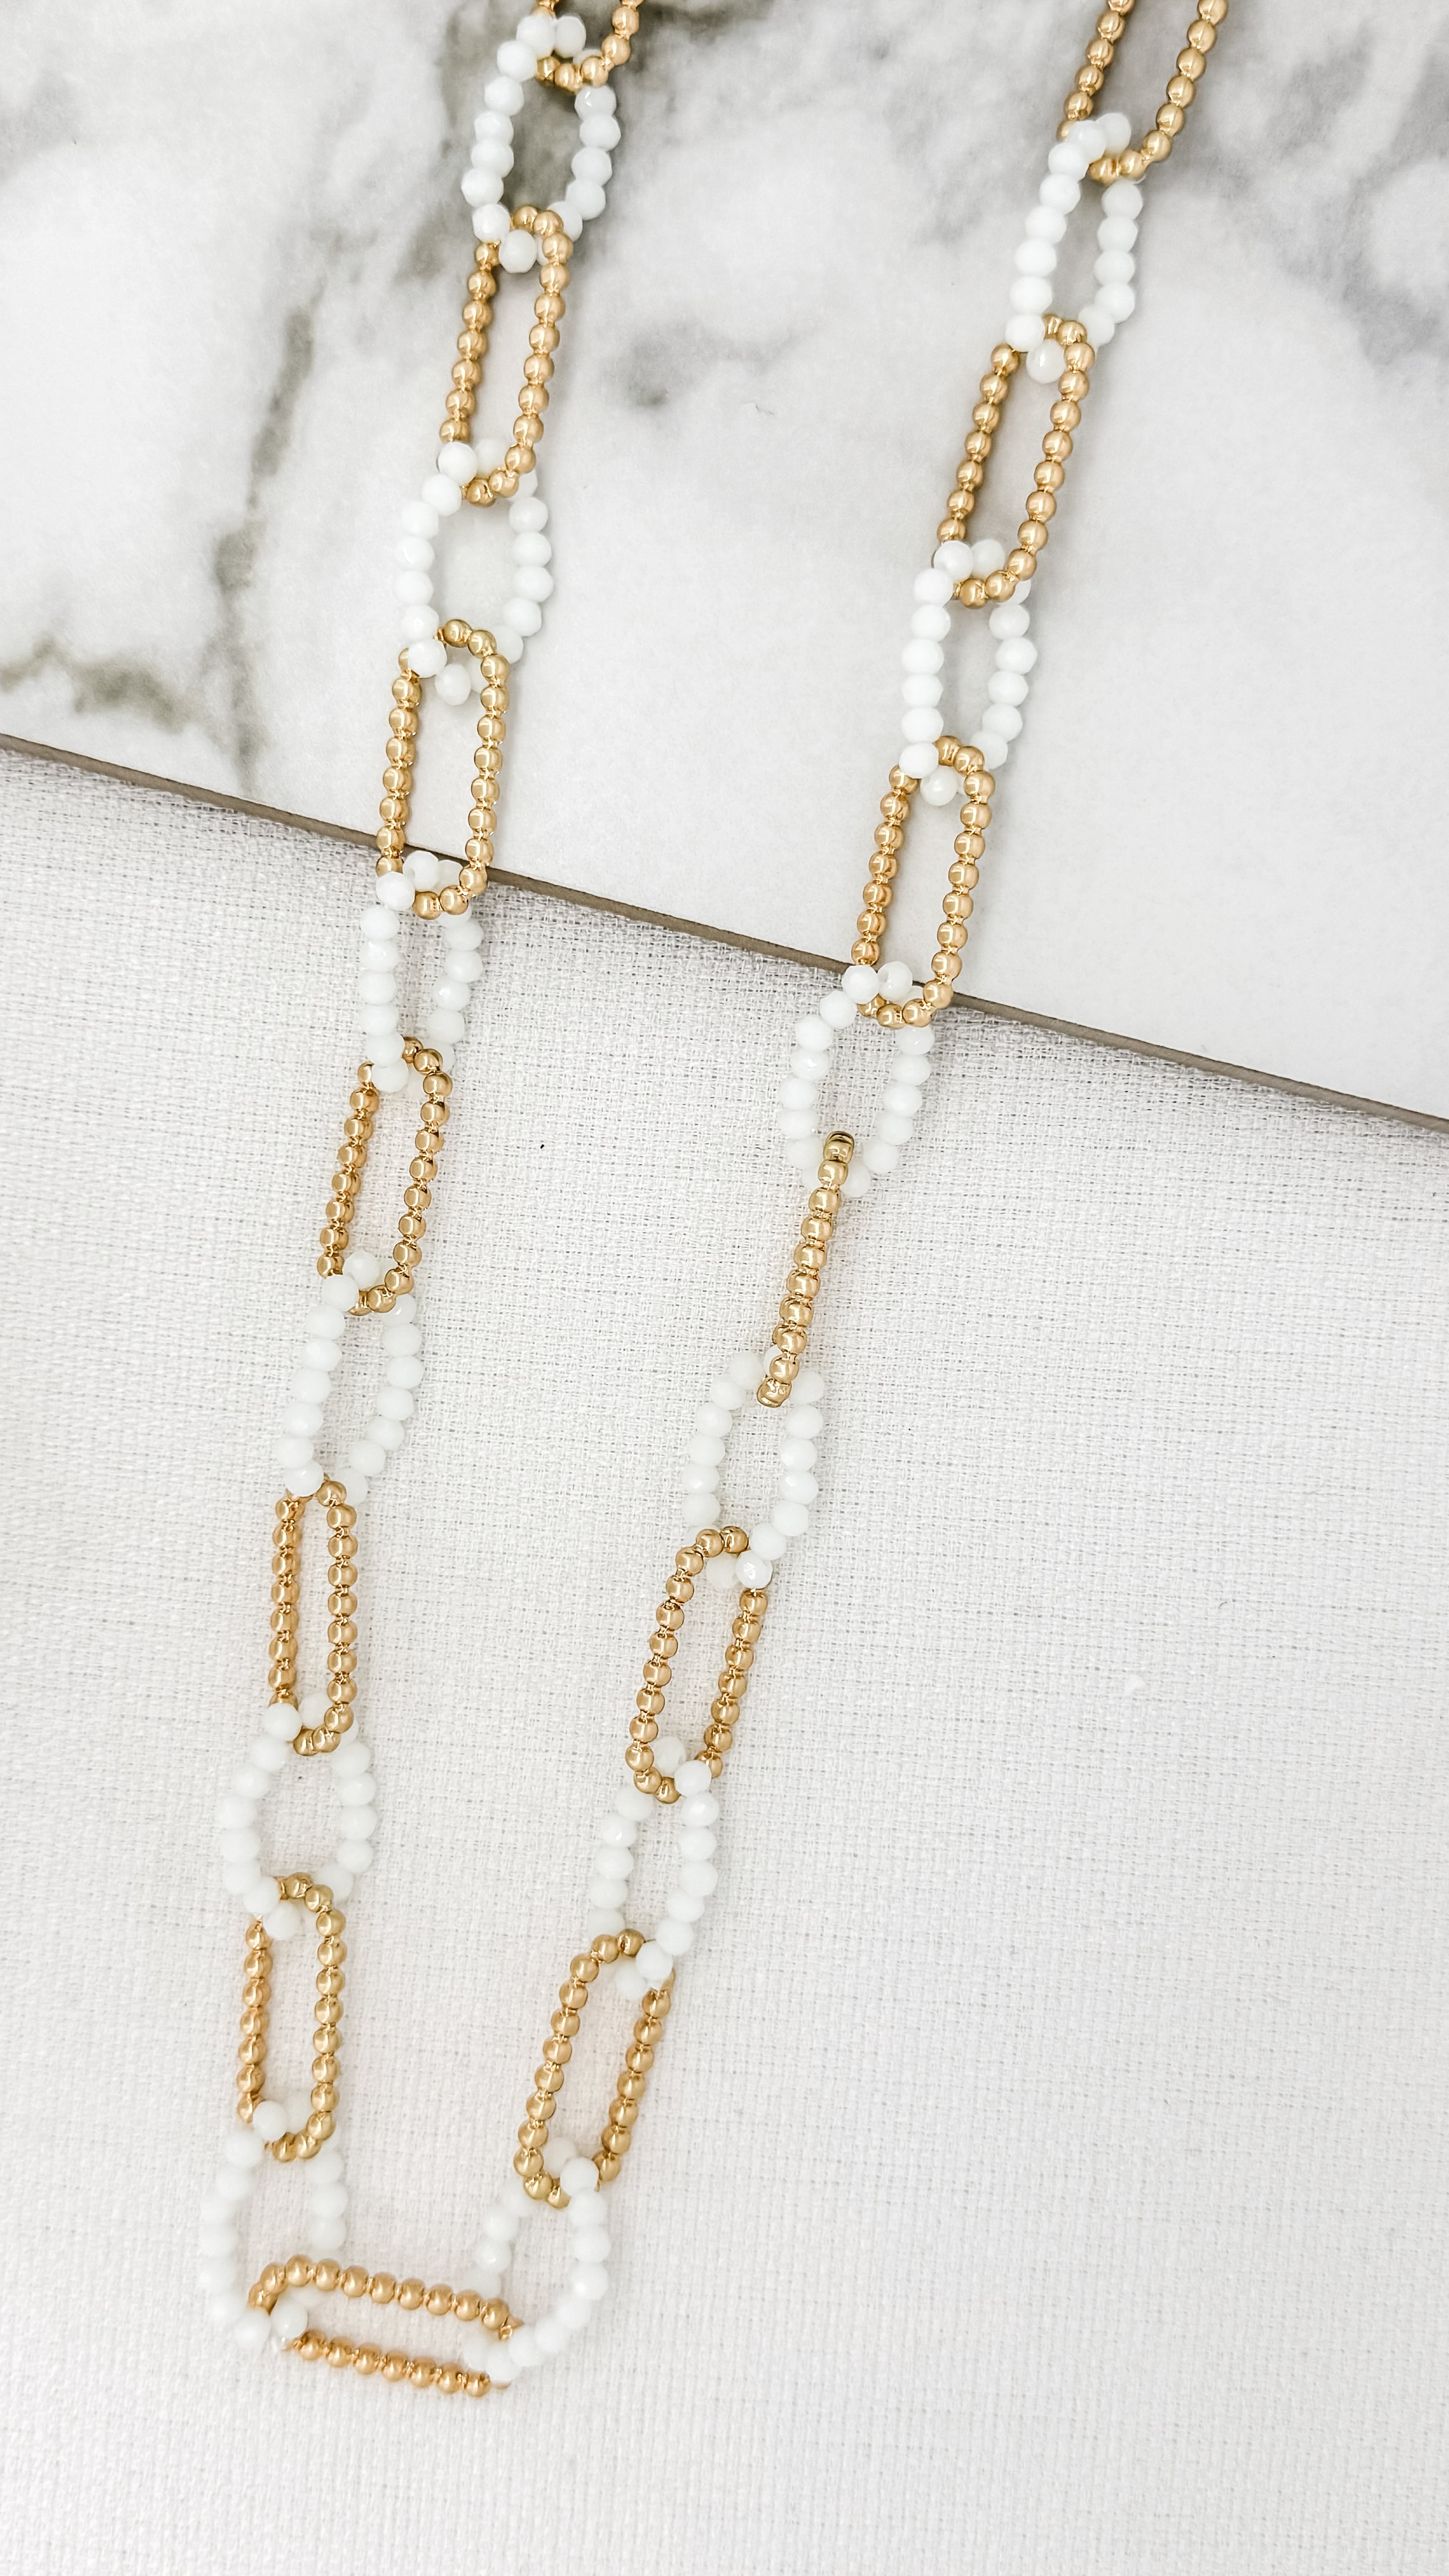 Beaded Chain in Gold and White